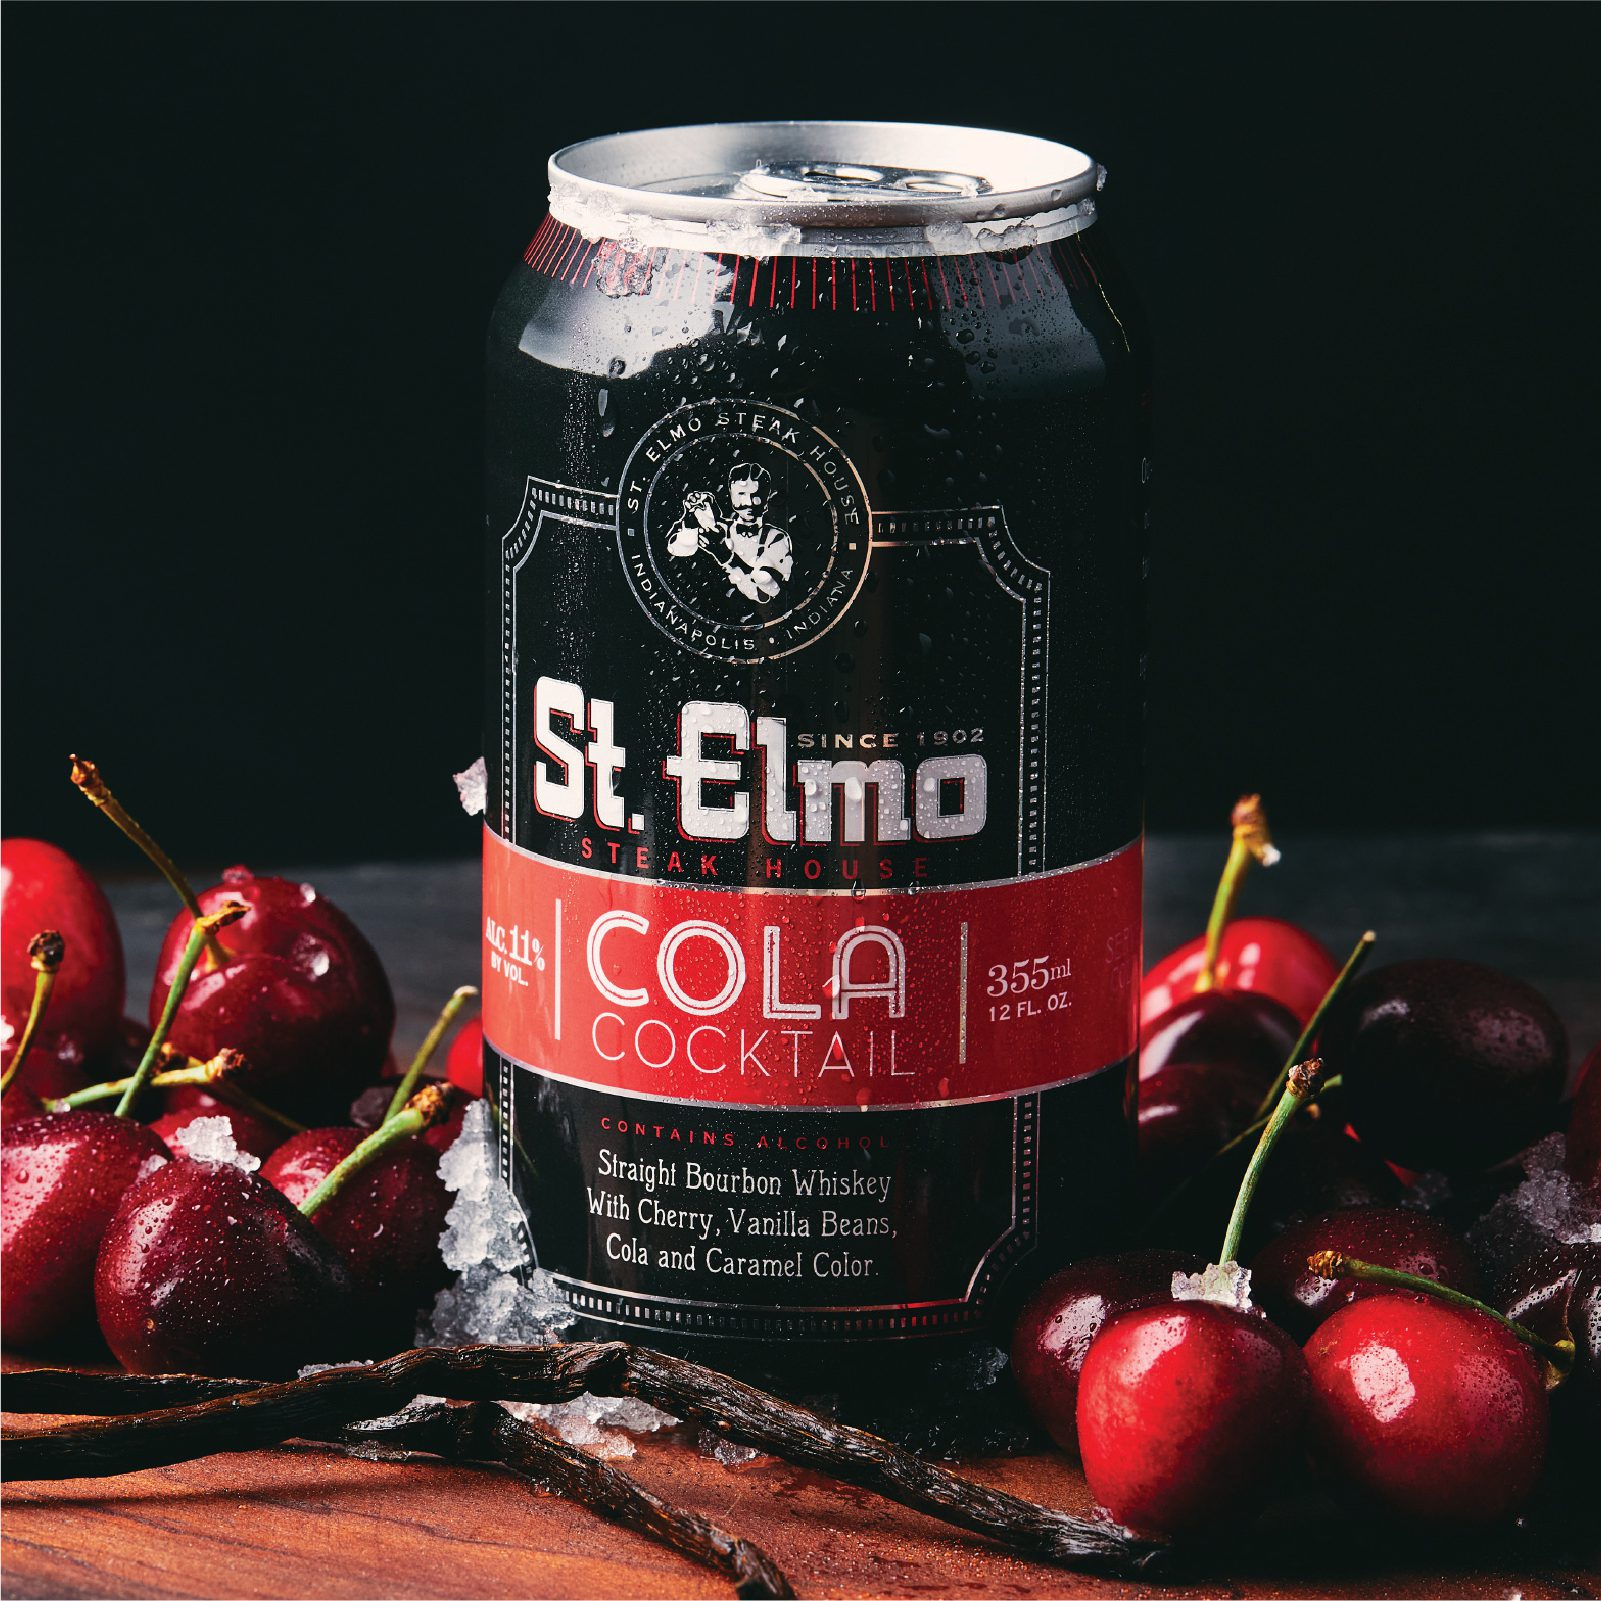 st elmo cola cocktail can